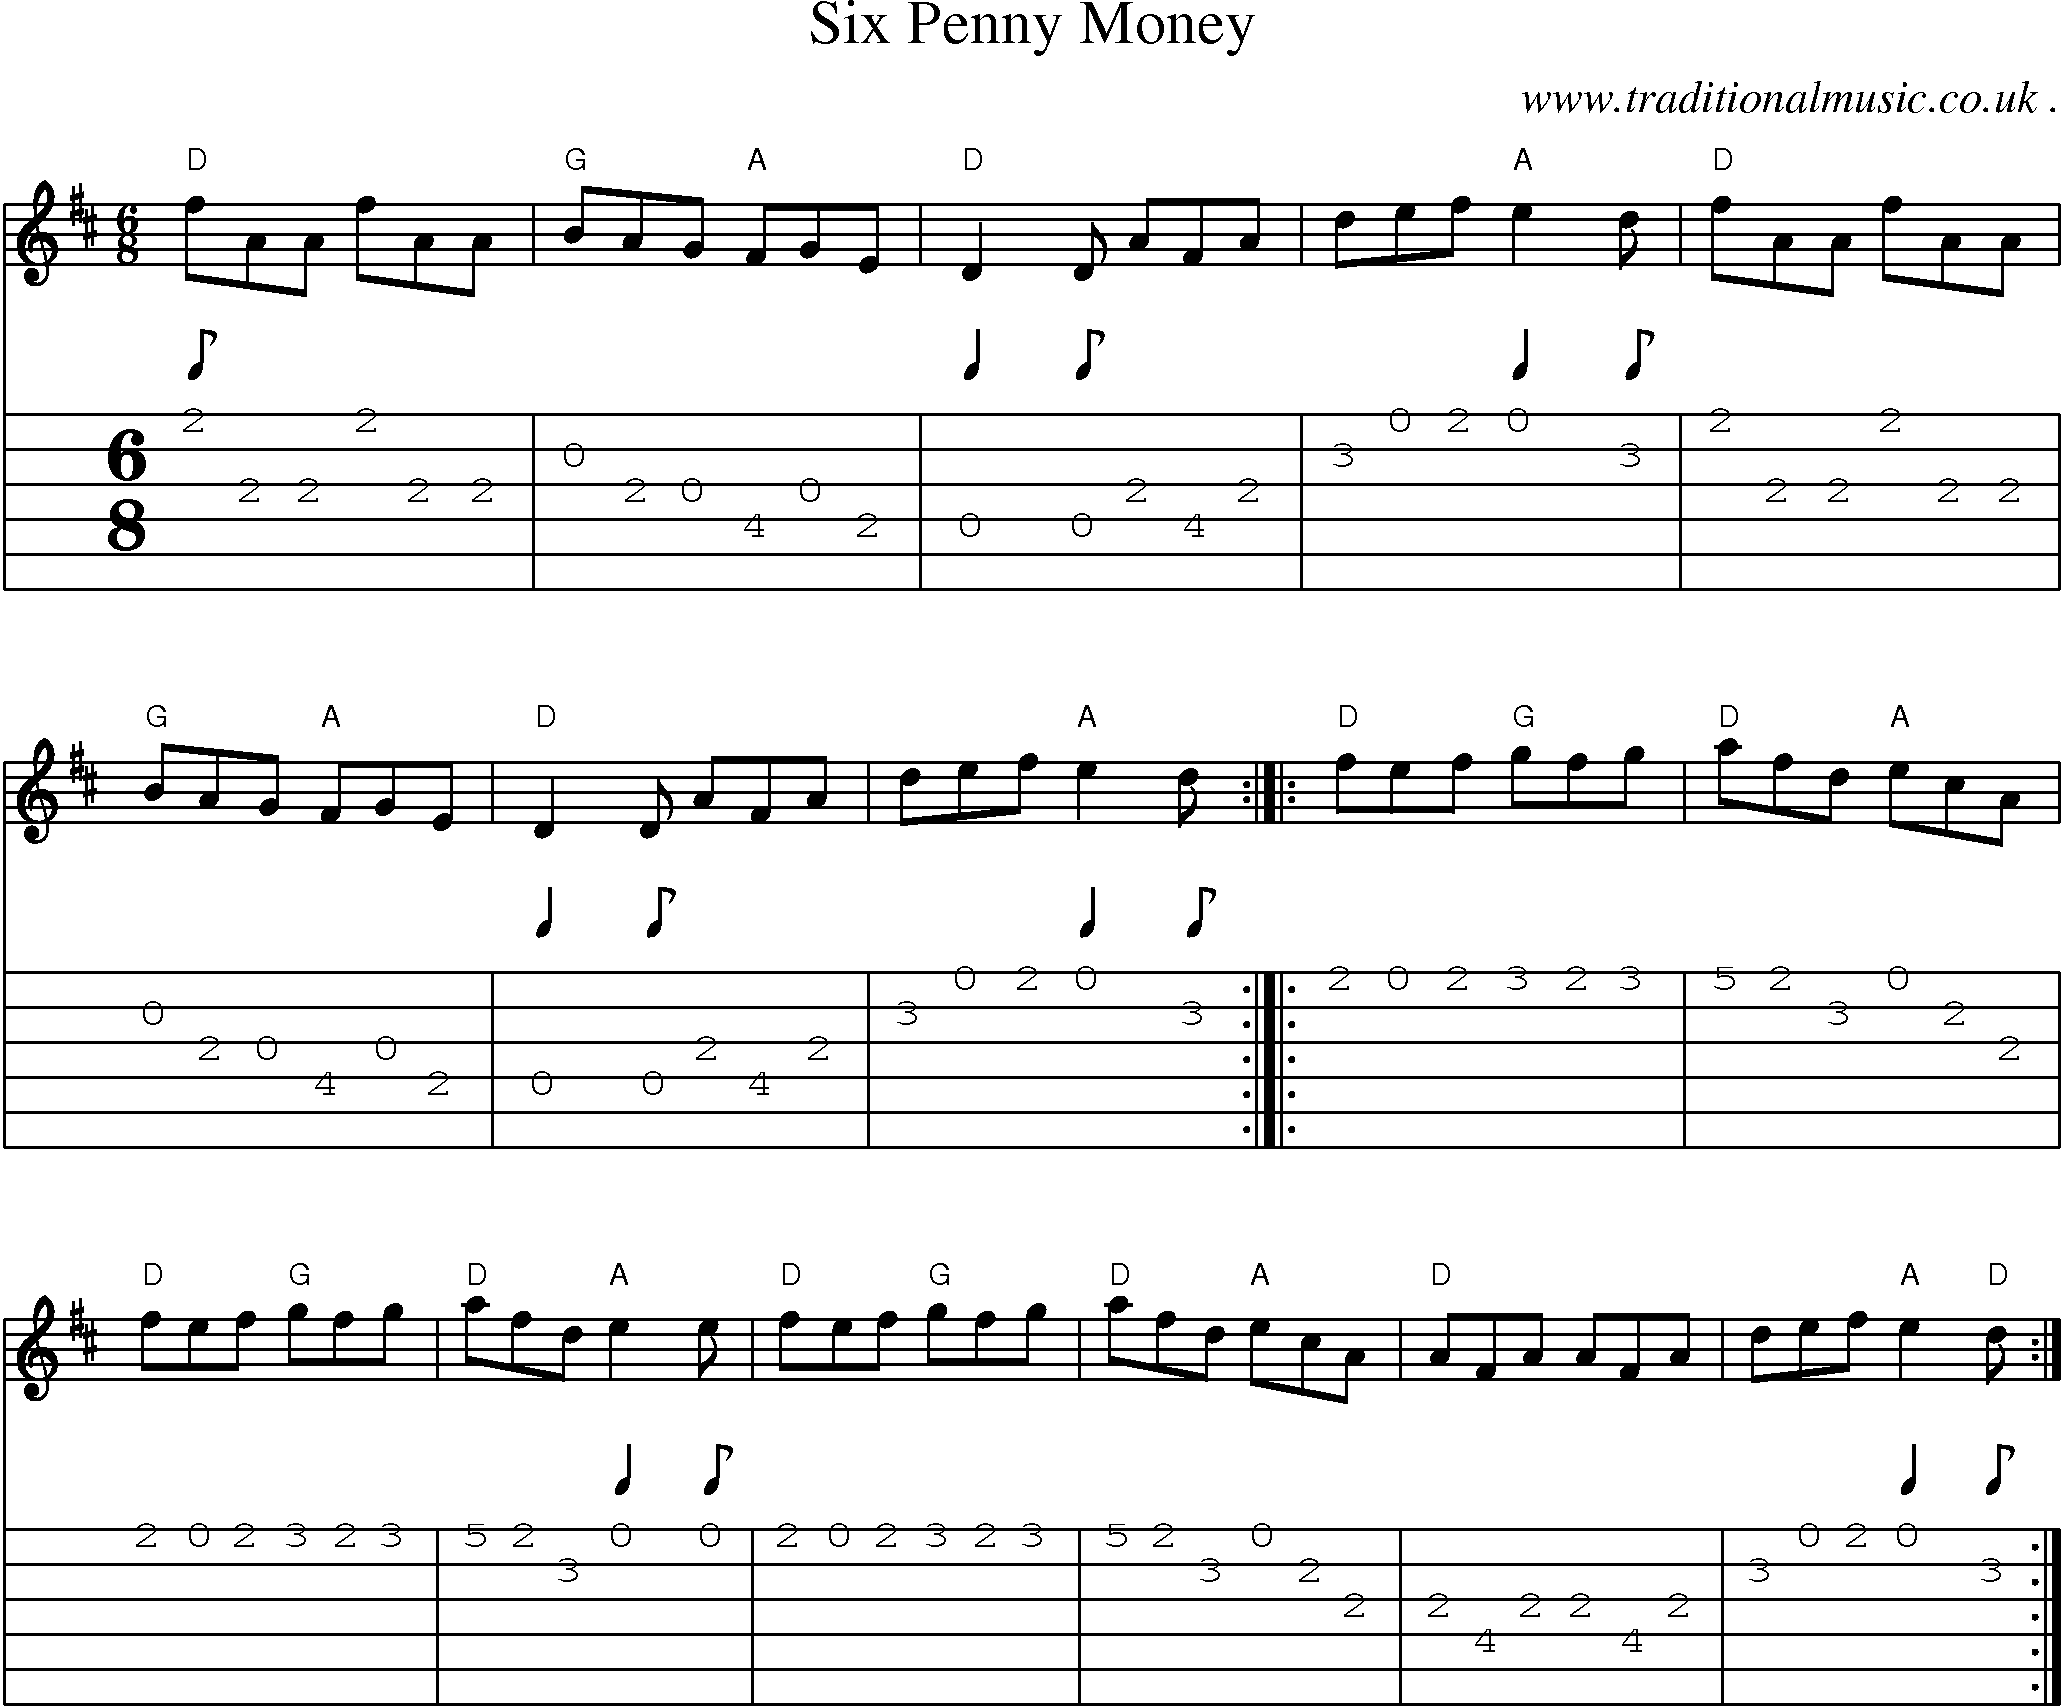 Music Score and Guitar Tabs for Six Penny Money